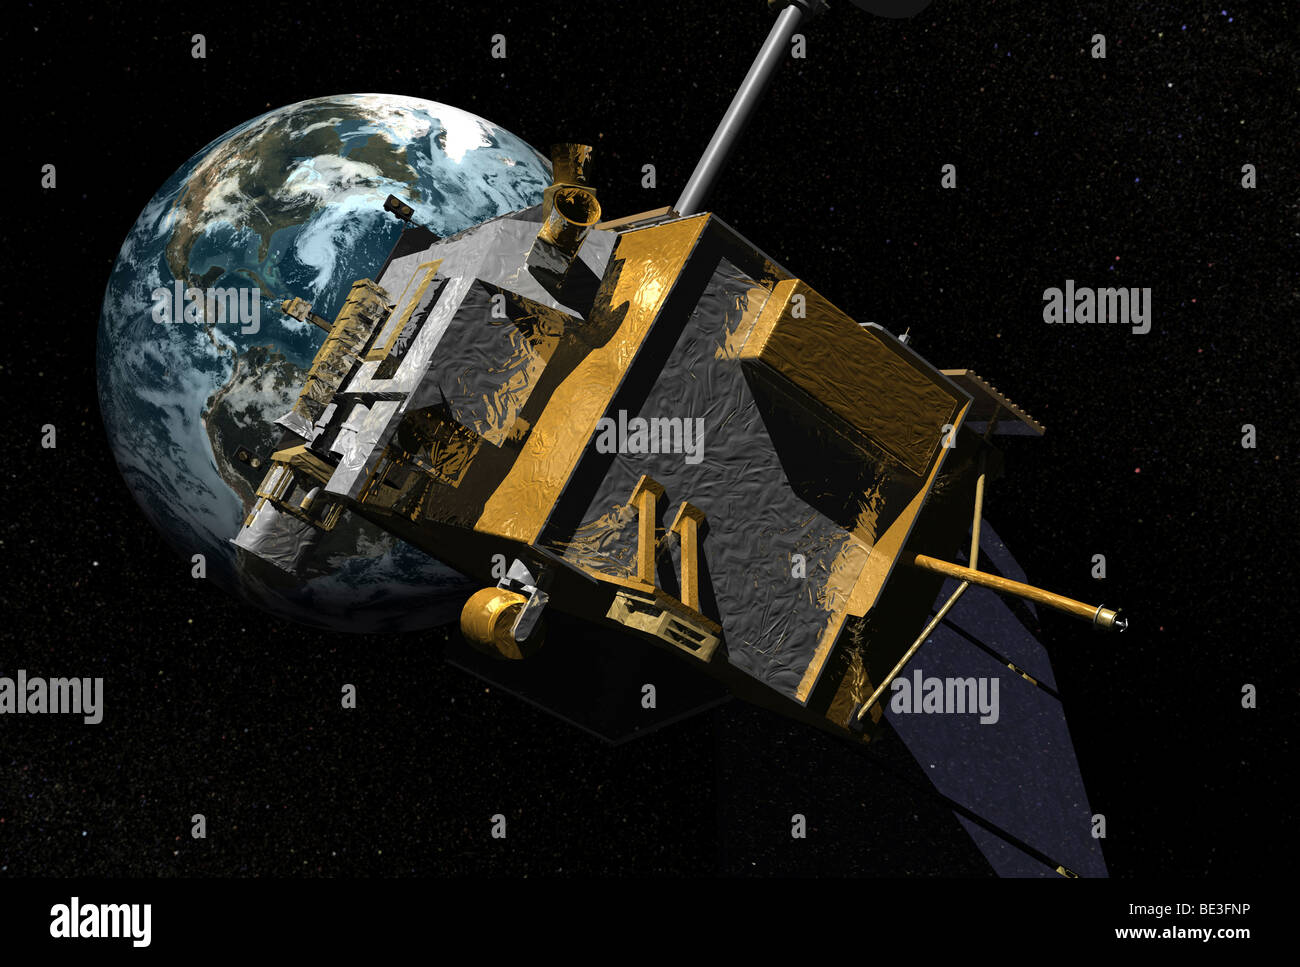 Artist Concept of the Lunar Reconnaissance Orbiter with an image of Earth in the background. Stock Photo